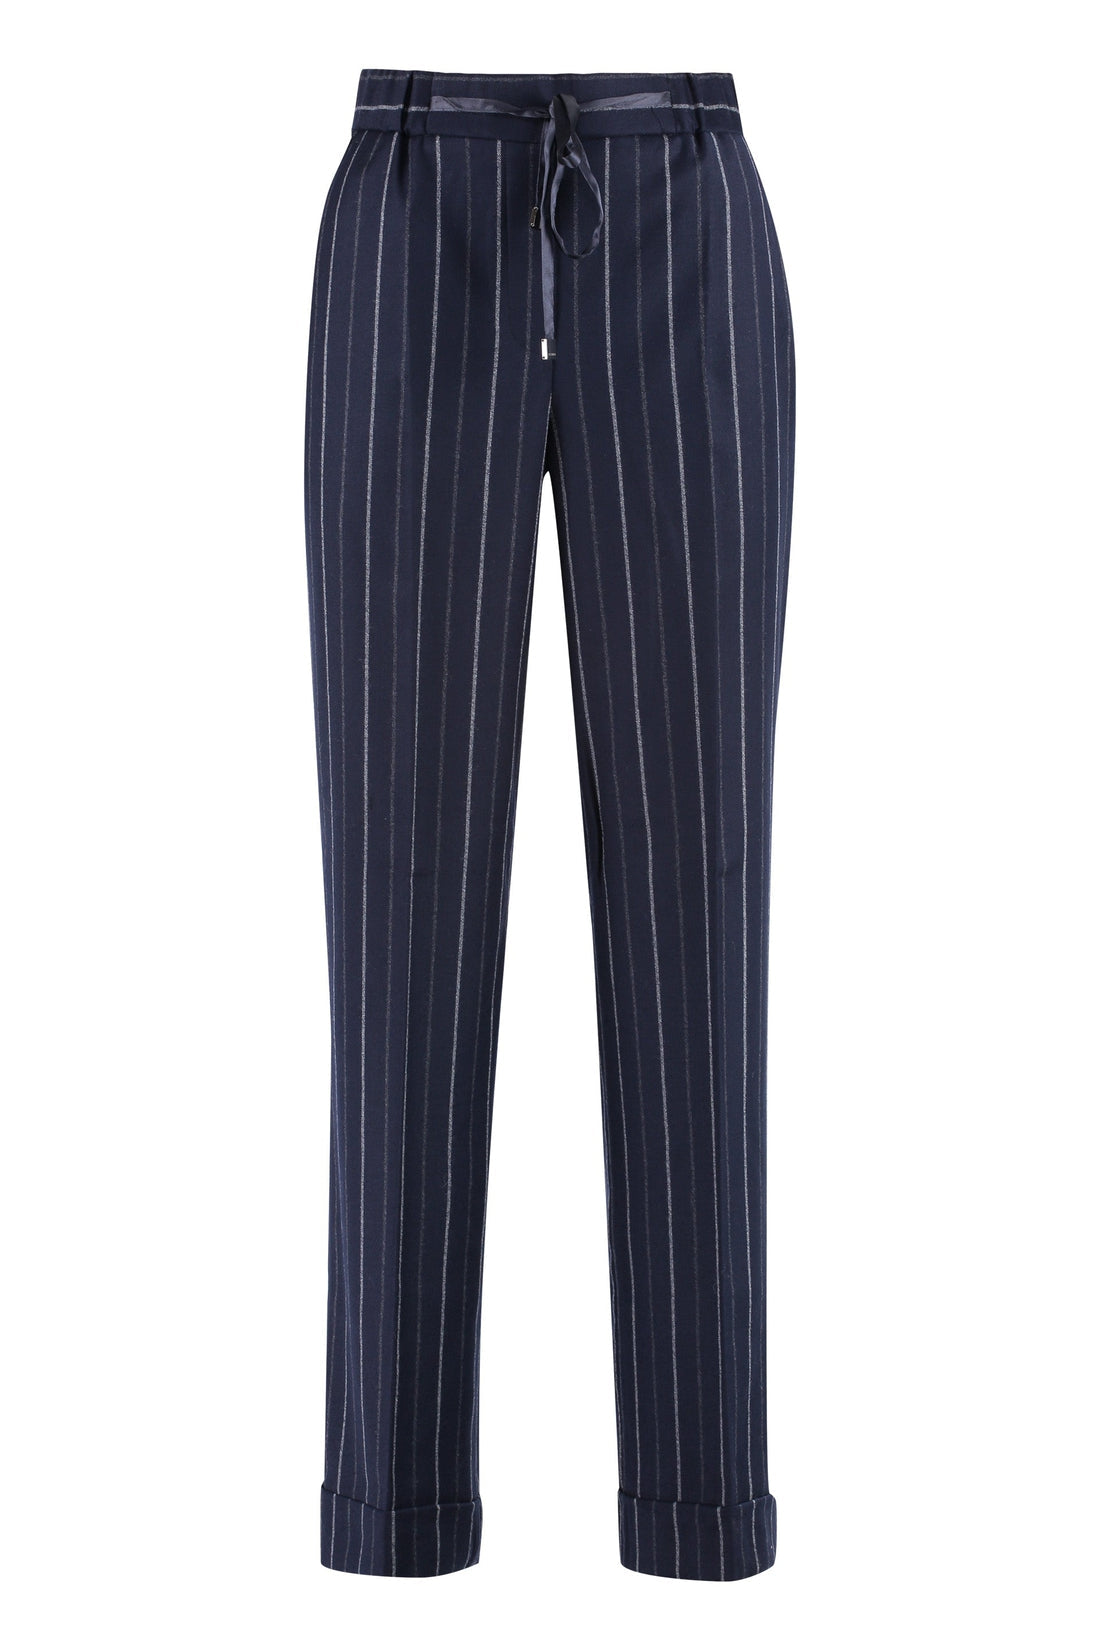 Peserico-OUTLET-SALE-Wool wide-leg trousers-ARCHIVIST